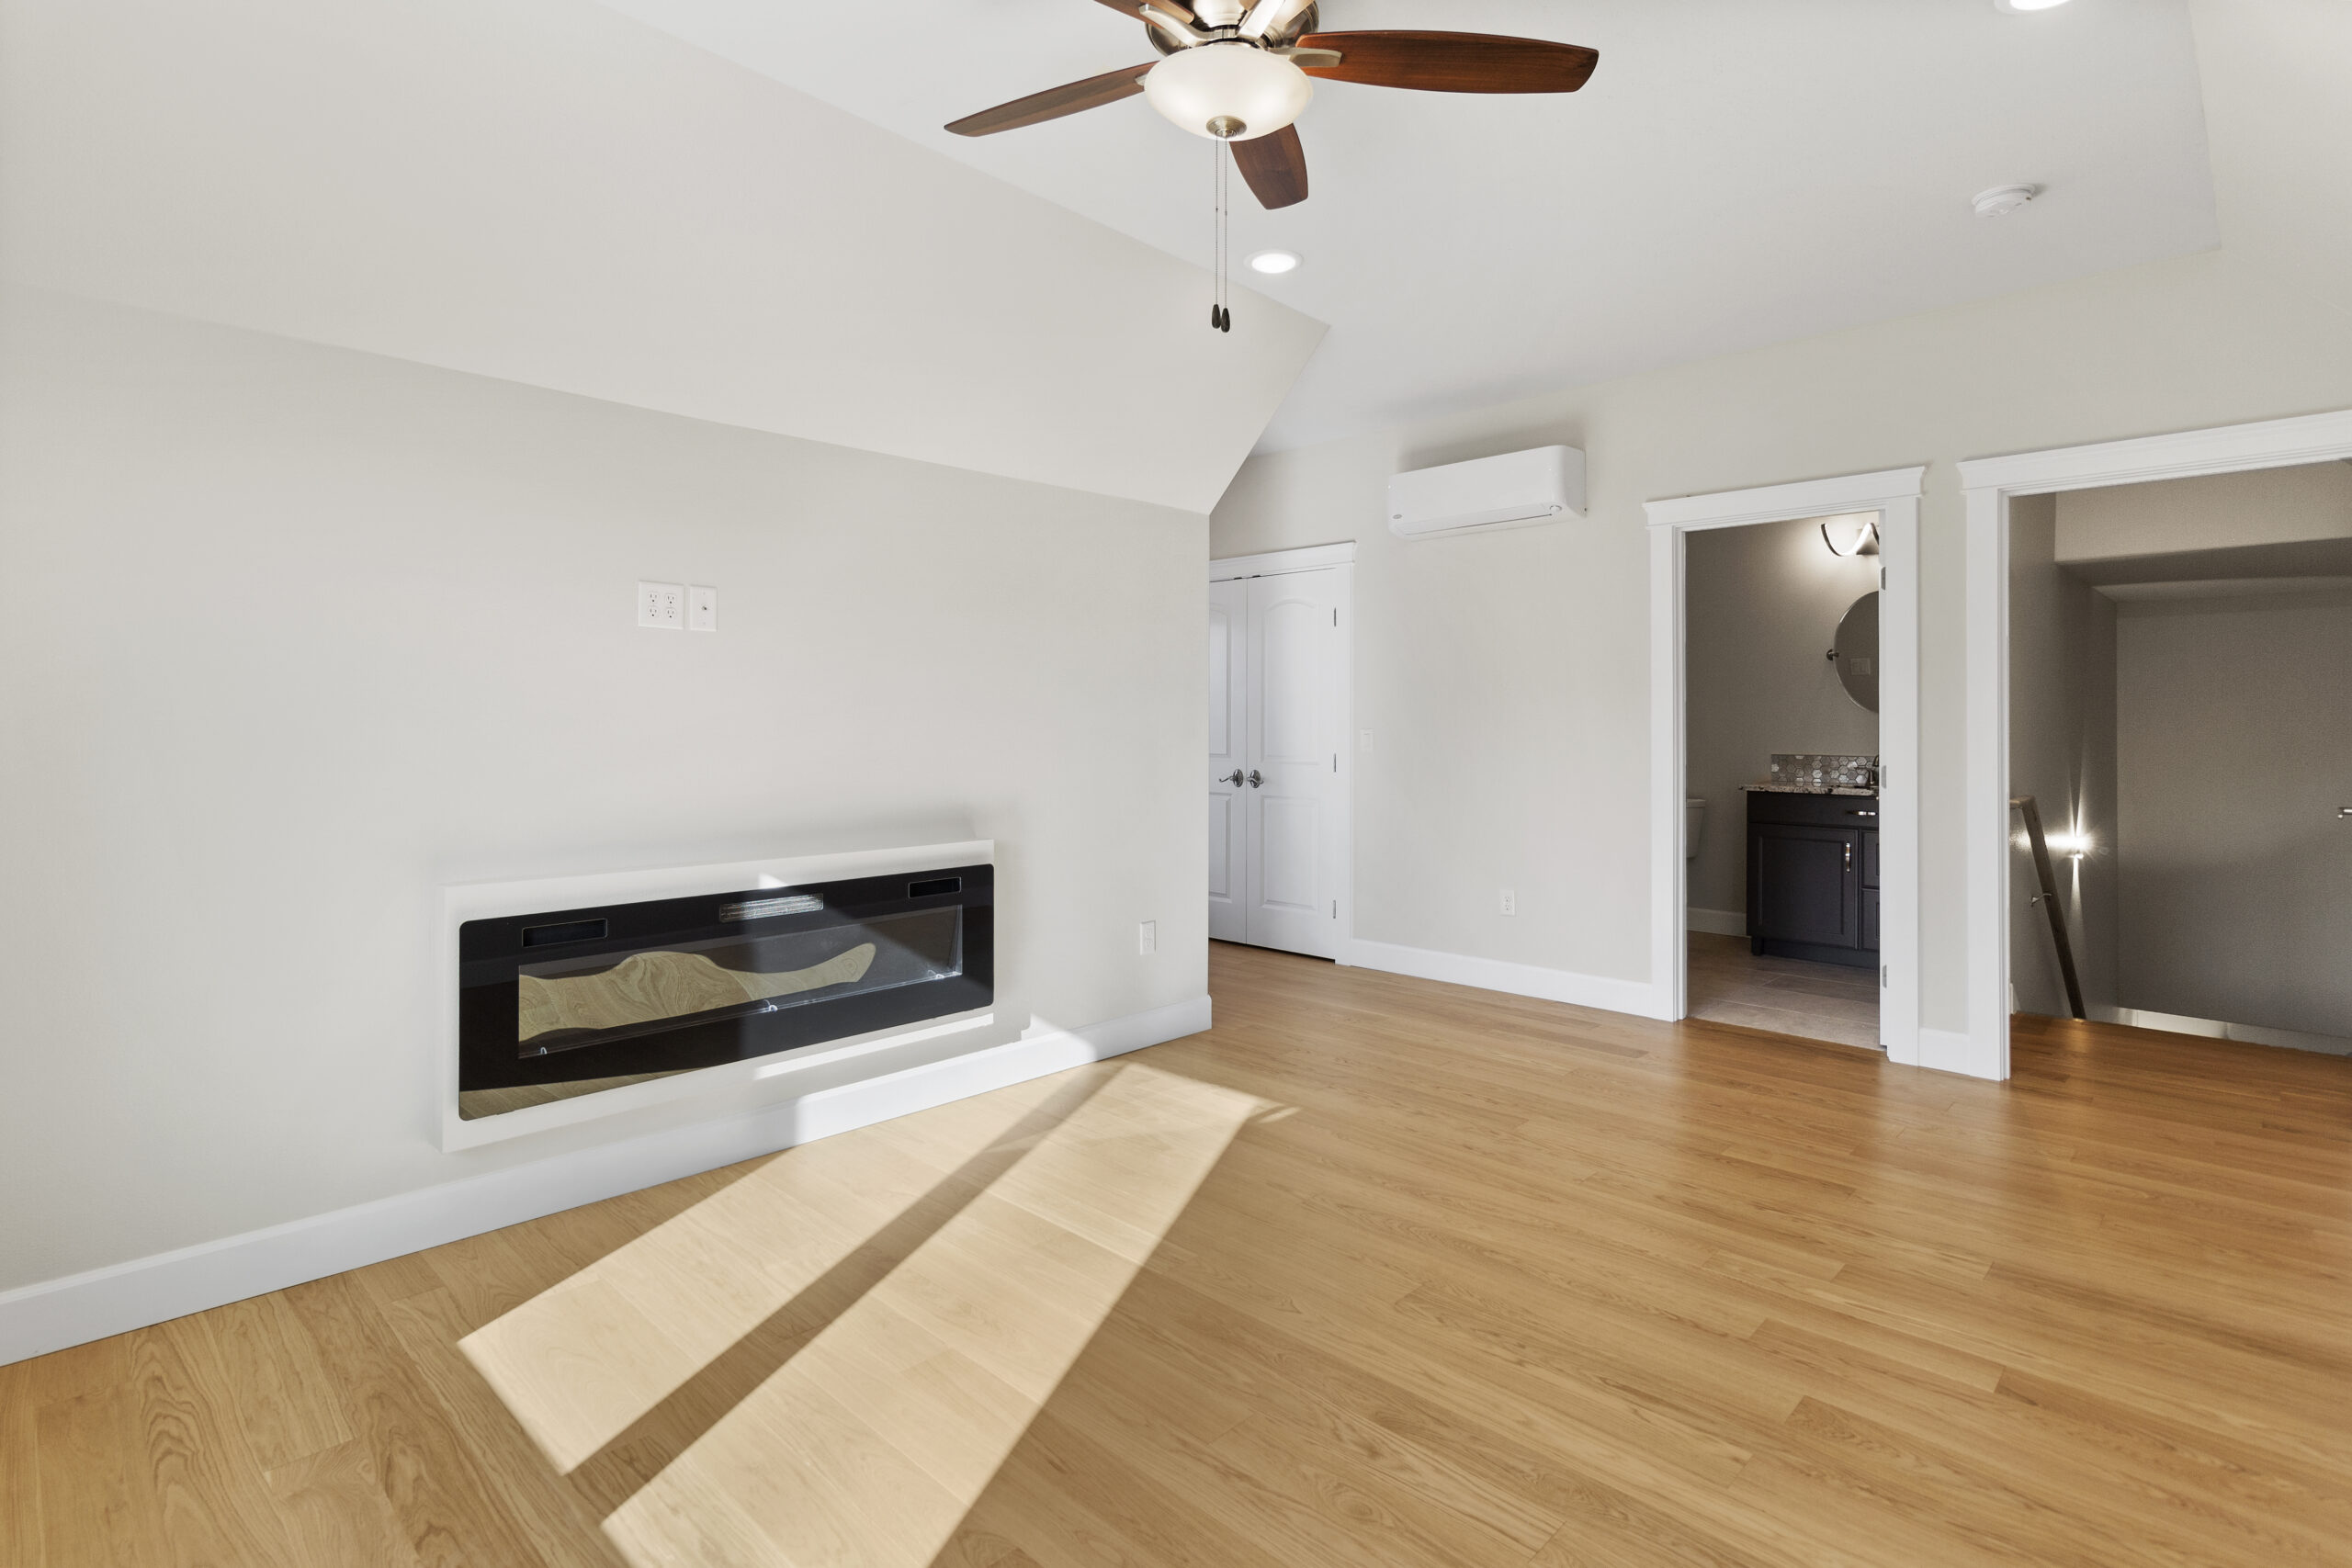 Empty living area, featuring fireplace in a modern home.